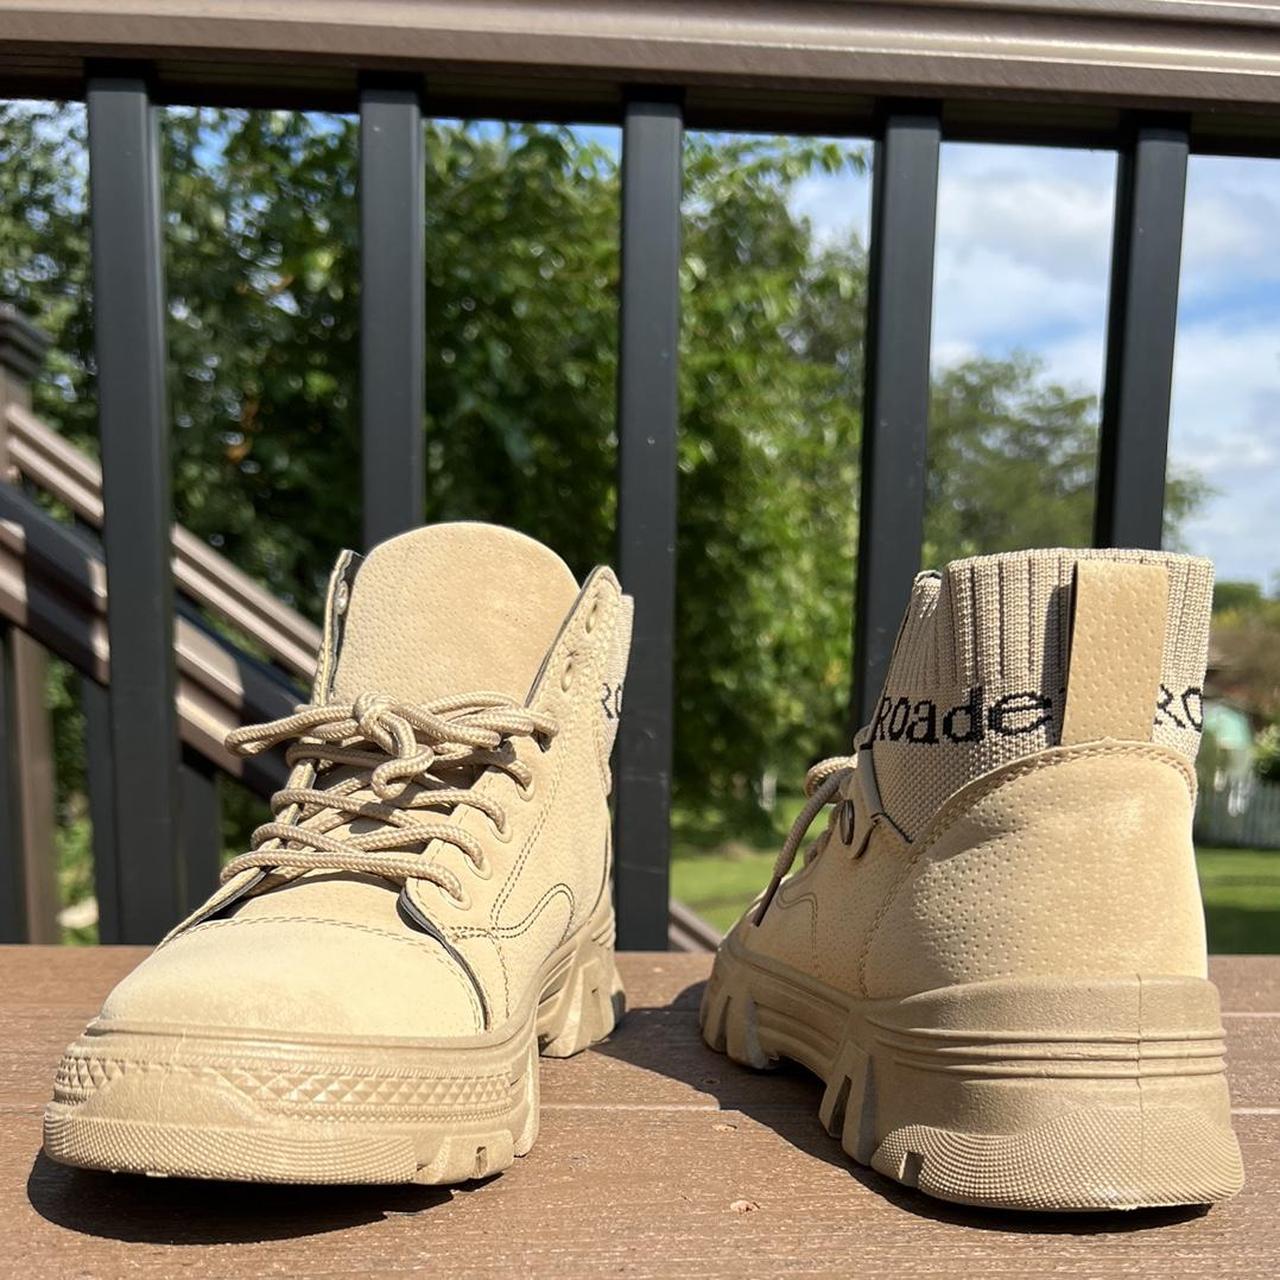 Country Road Men's Cream and Tan Boots (3)